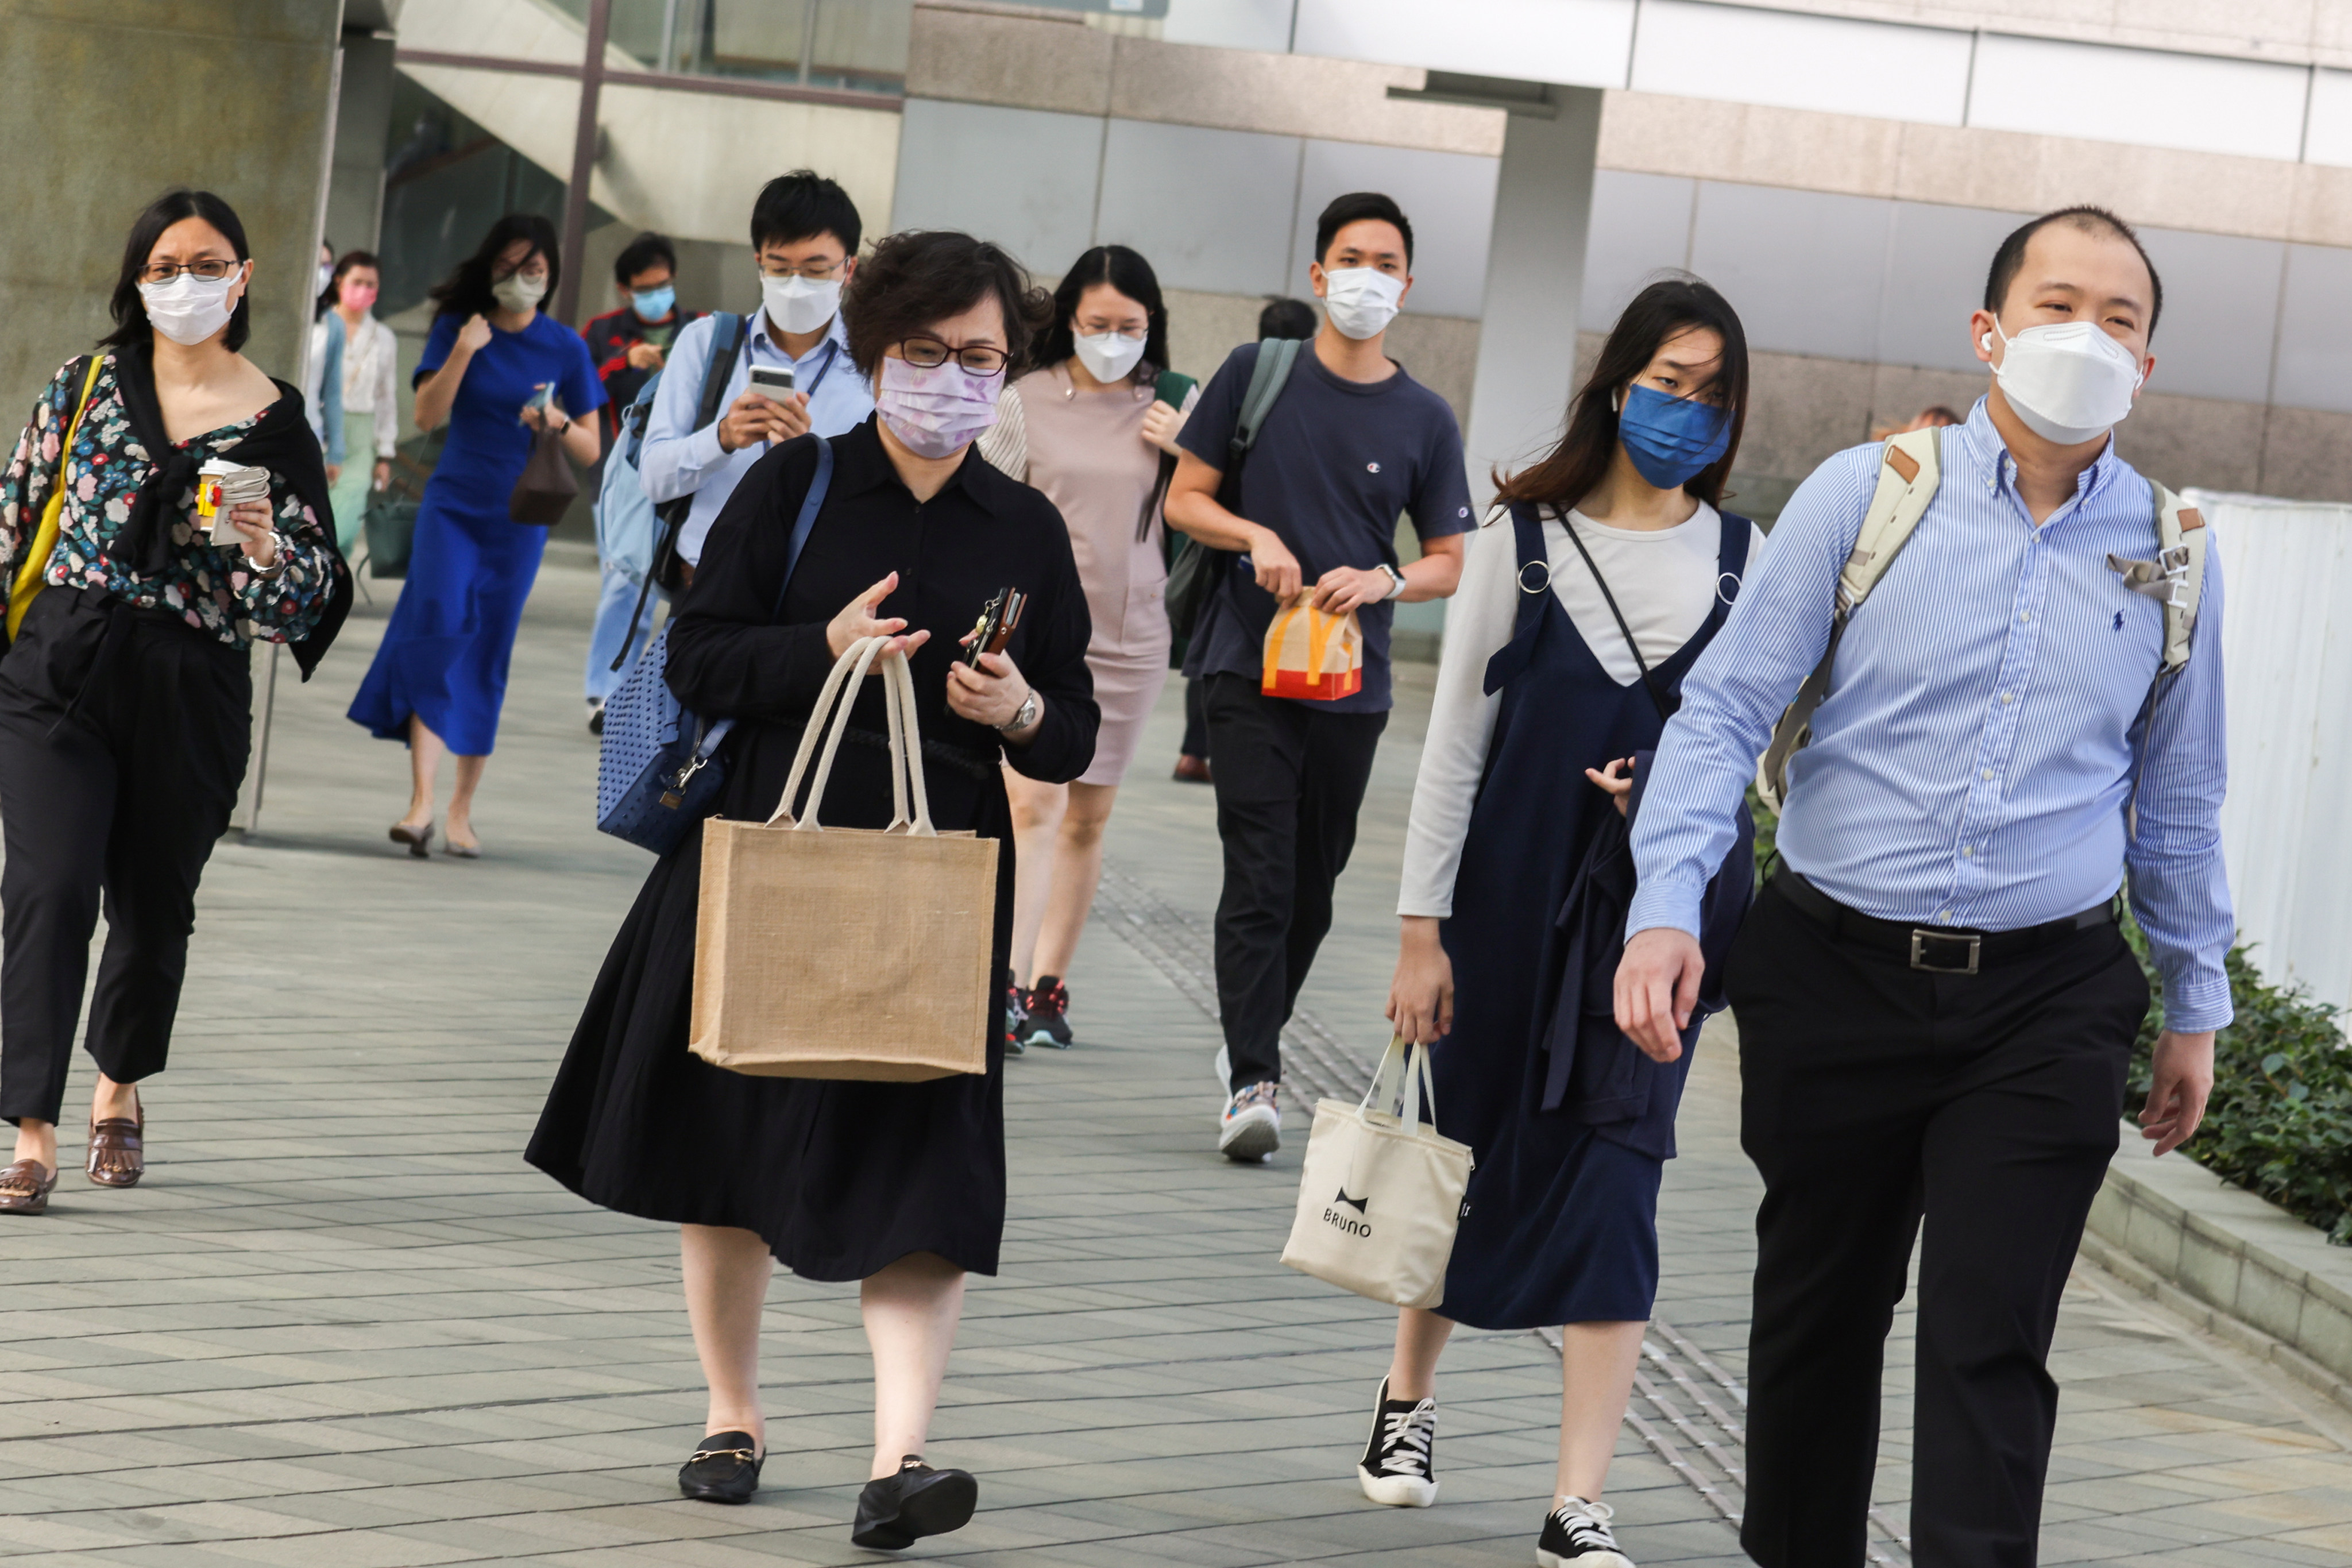 Hong Kong’s civil servants head to work at the government complex in Admiralty. Photo: Nora Tam